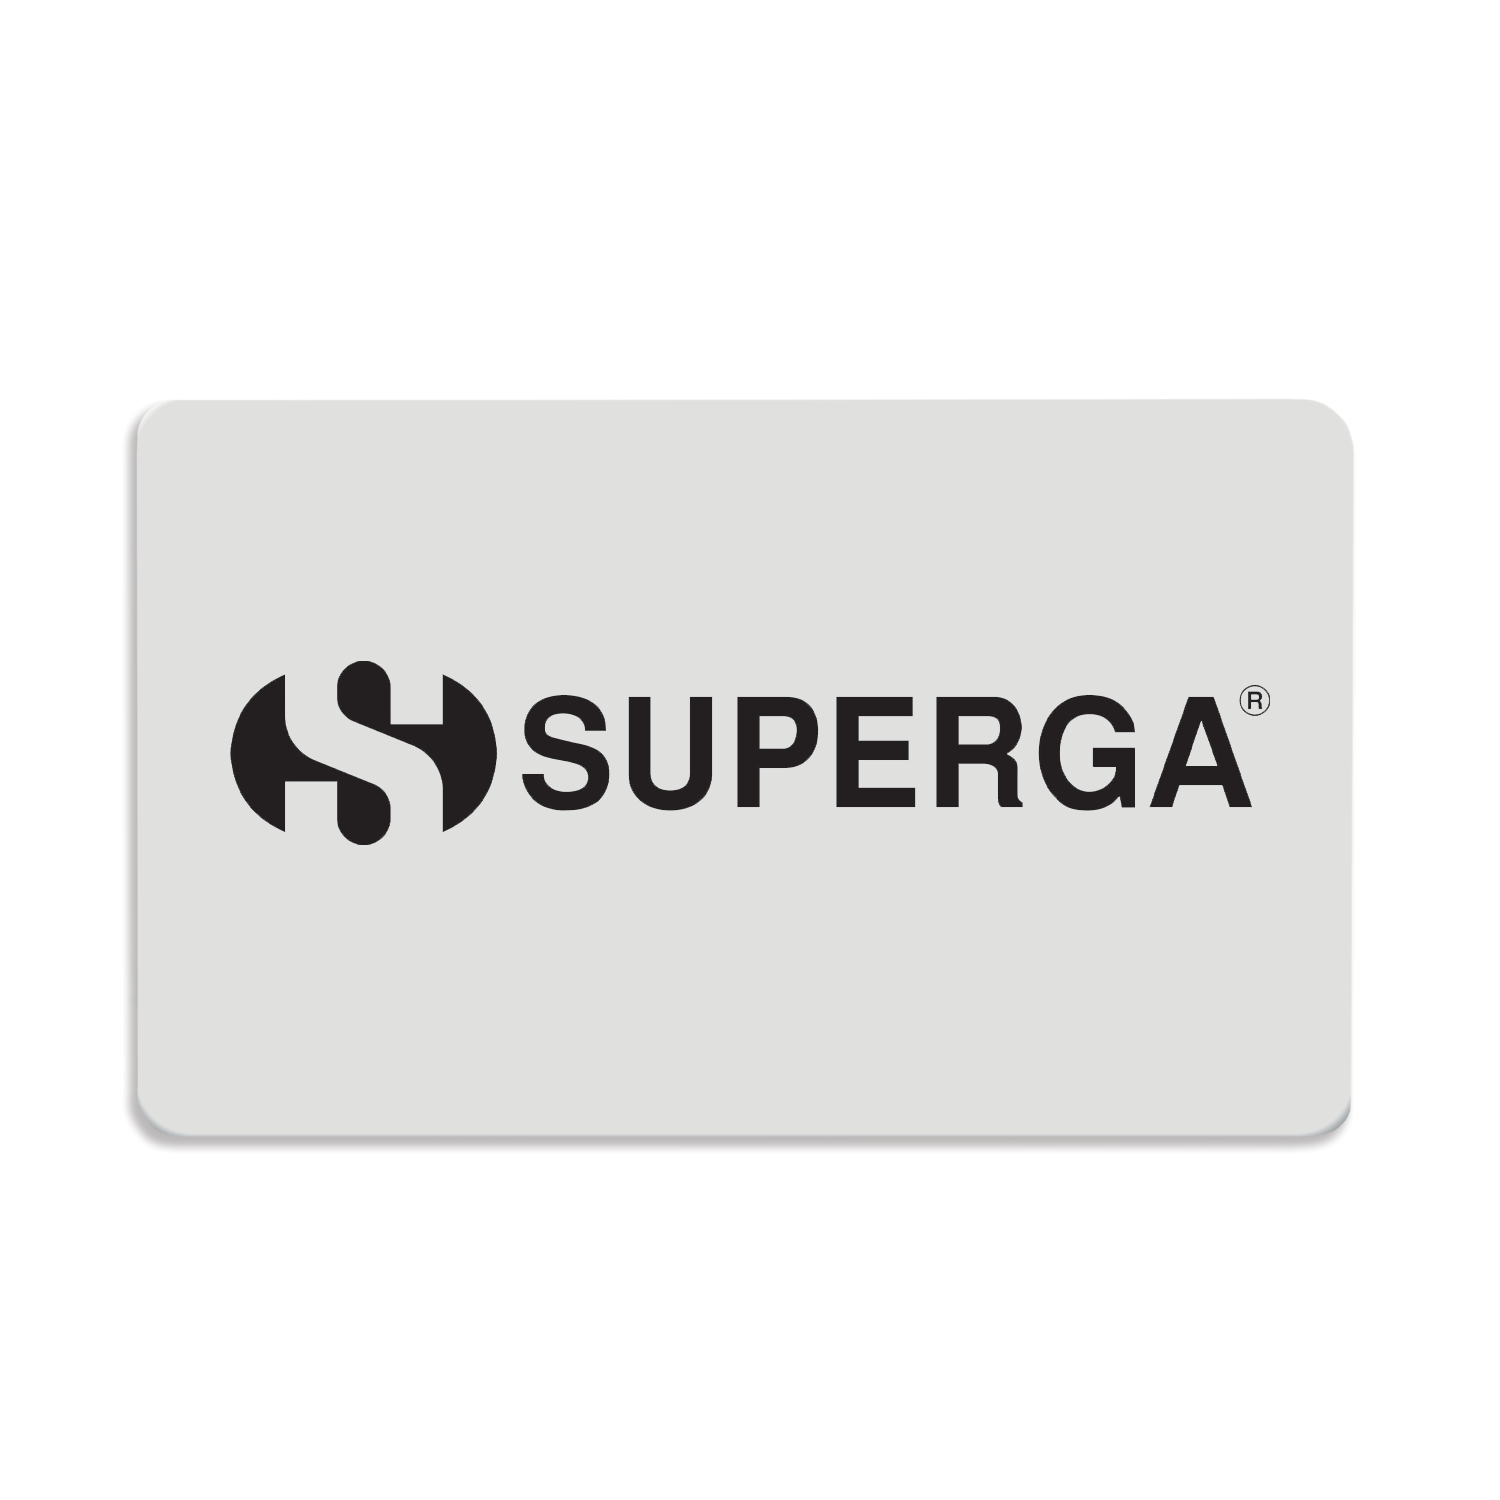 Superga Gift Card. Side view.